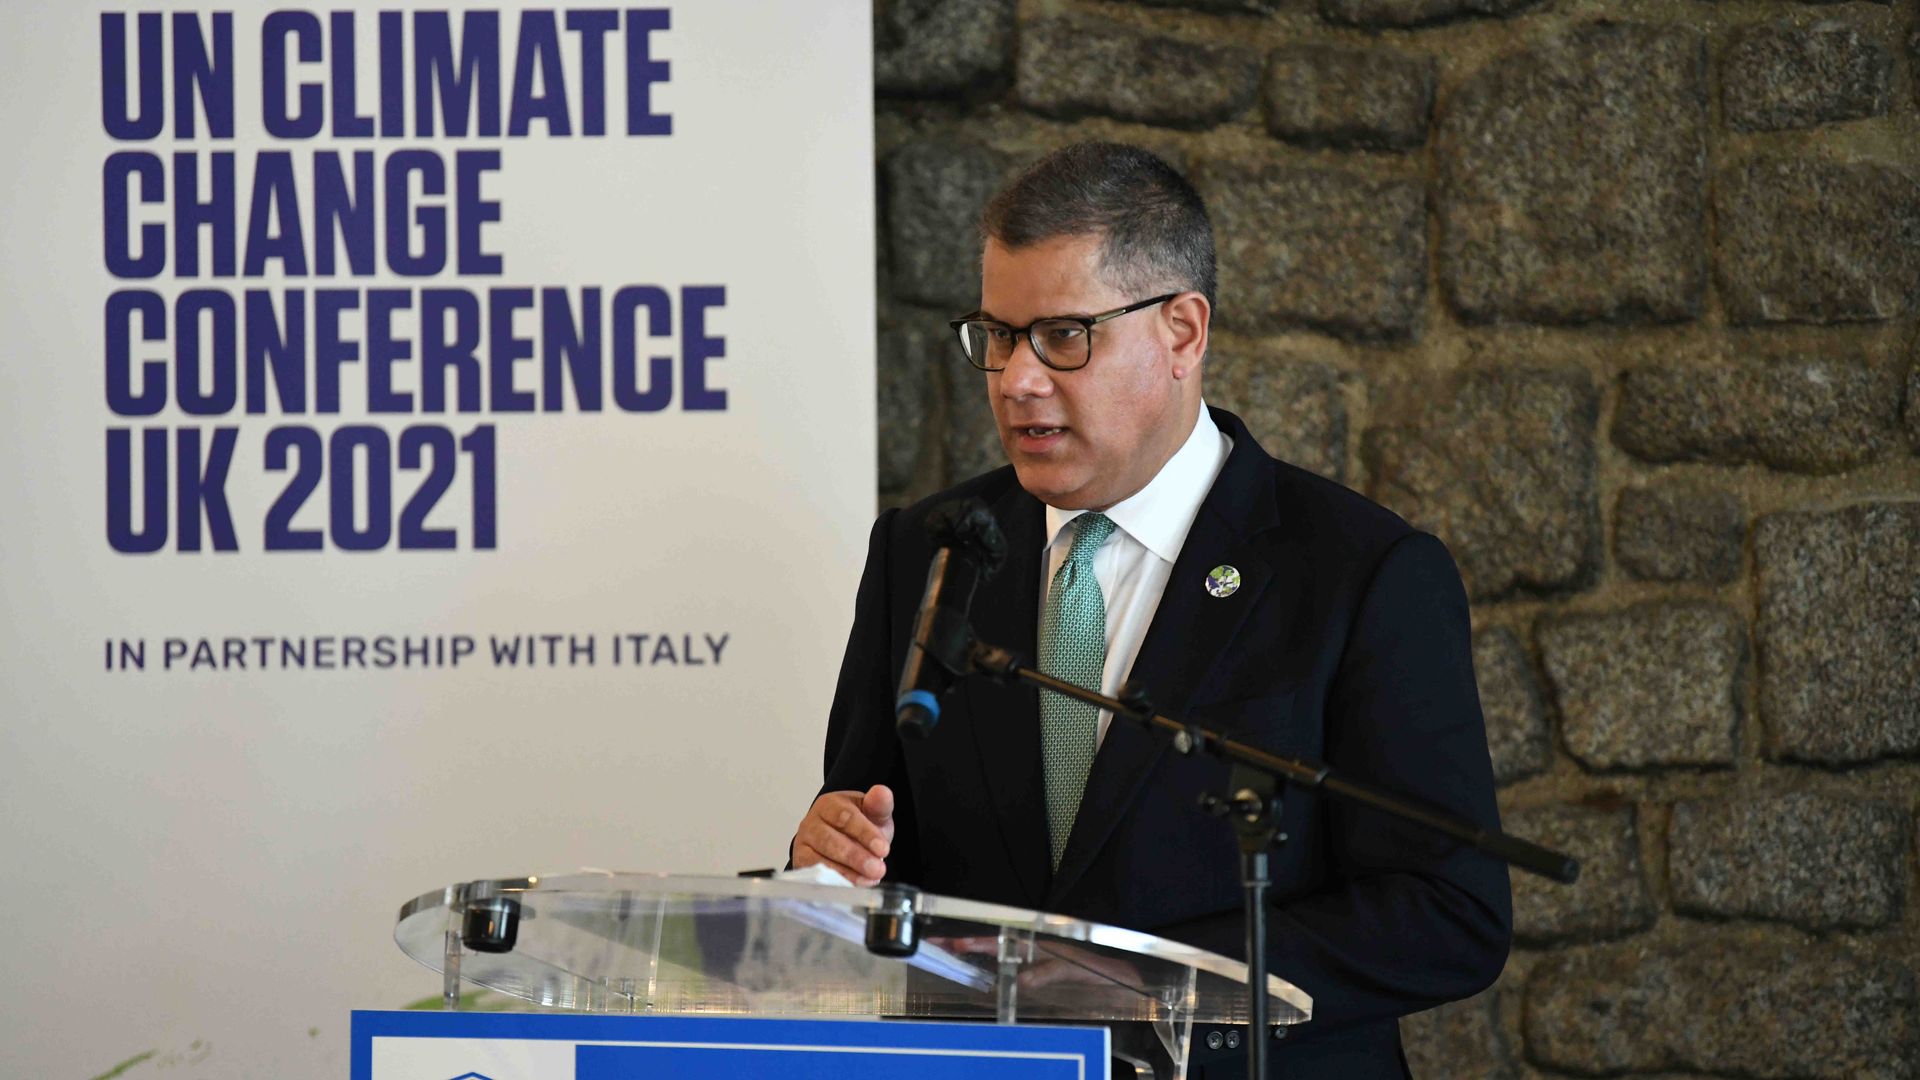 Alok Sharma, head of the UN Climate Summit in Glasgow, speaks in Paris on Oct. 12.